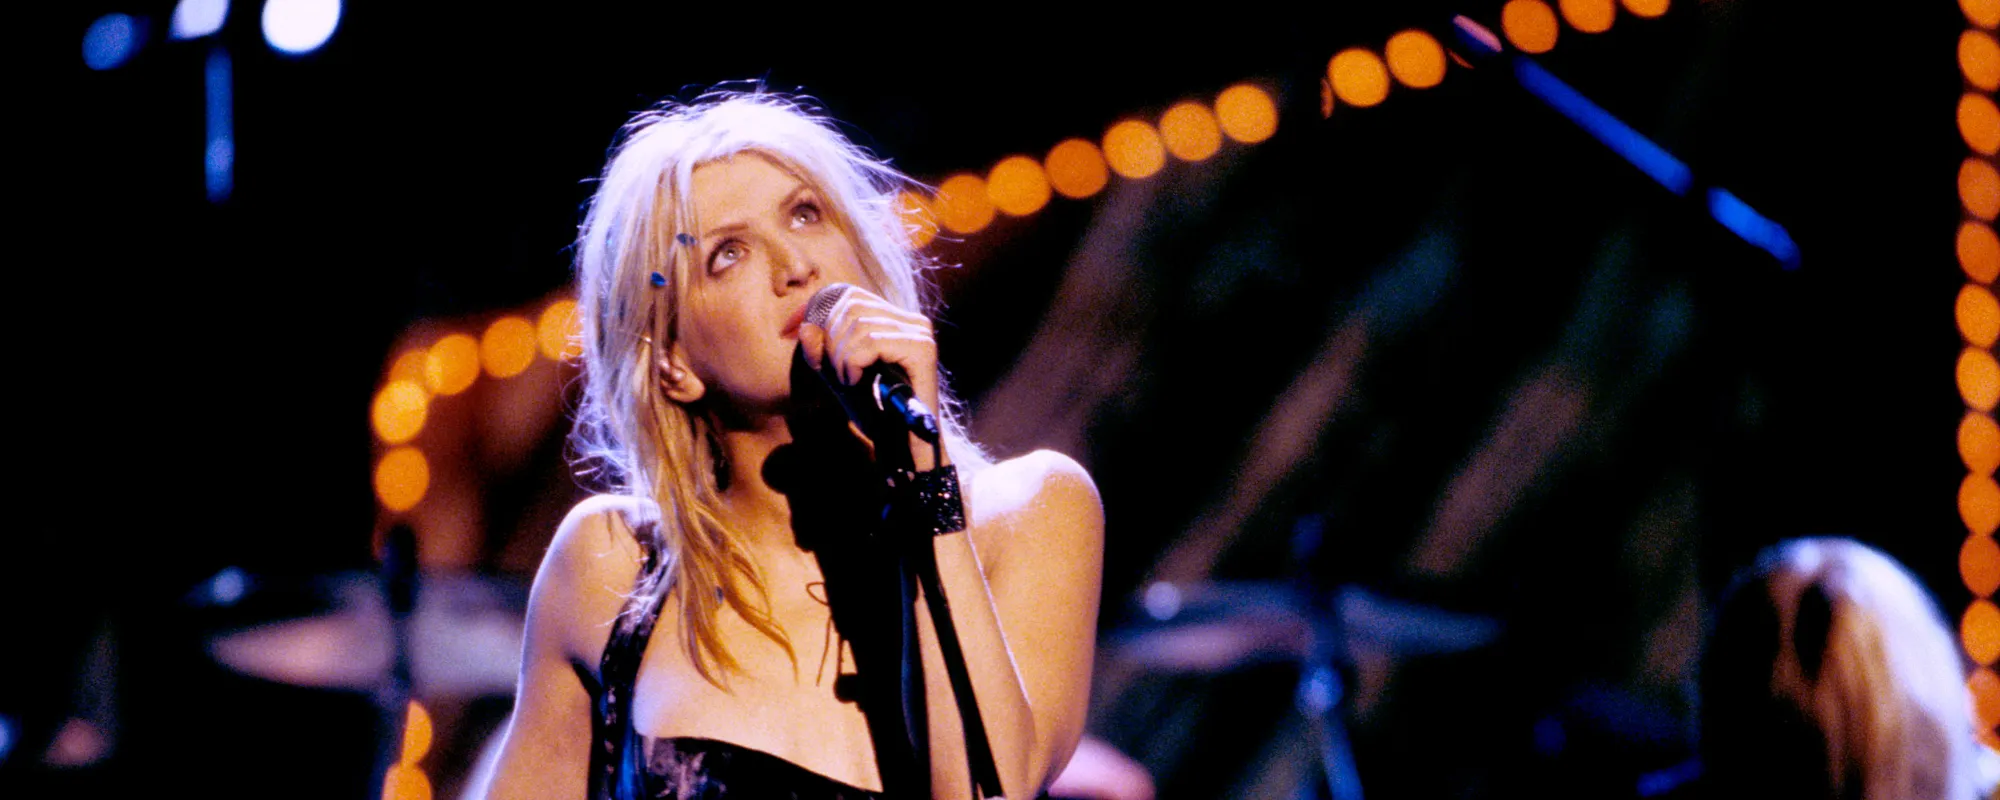 Where Are They Now?: Courtney Love